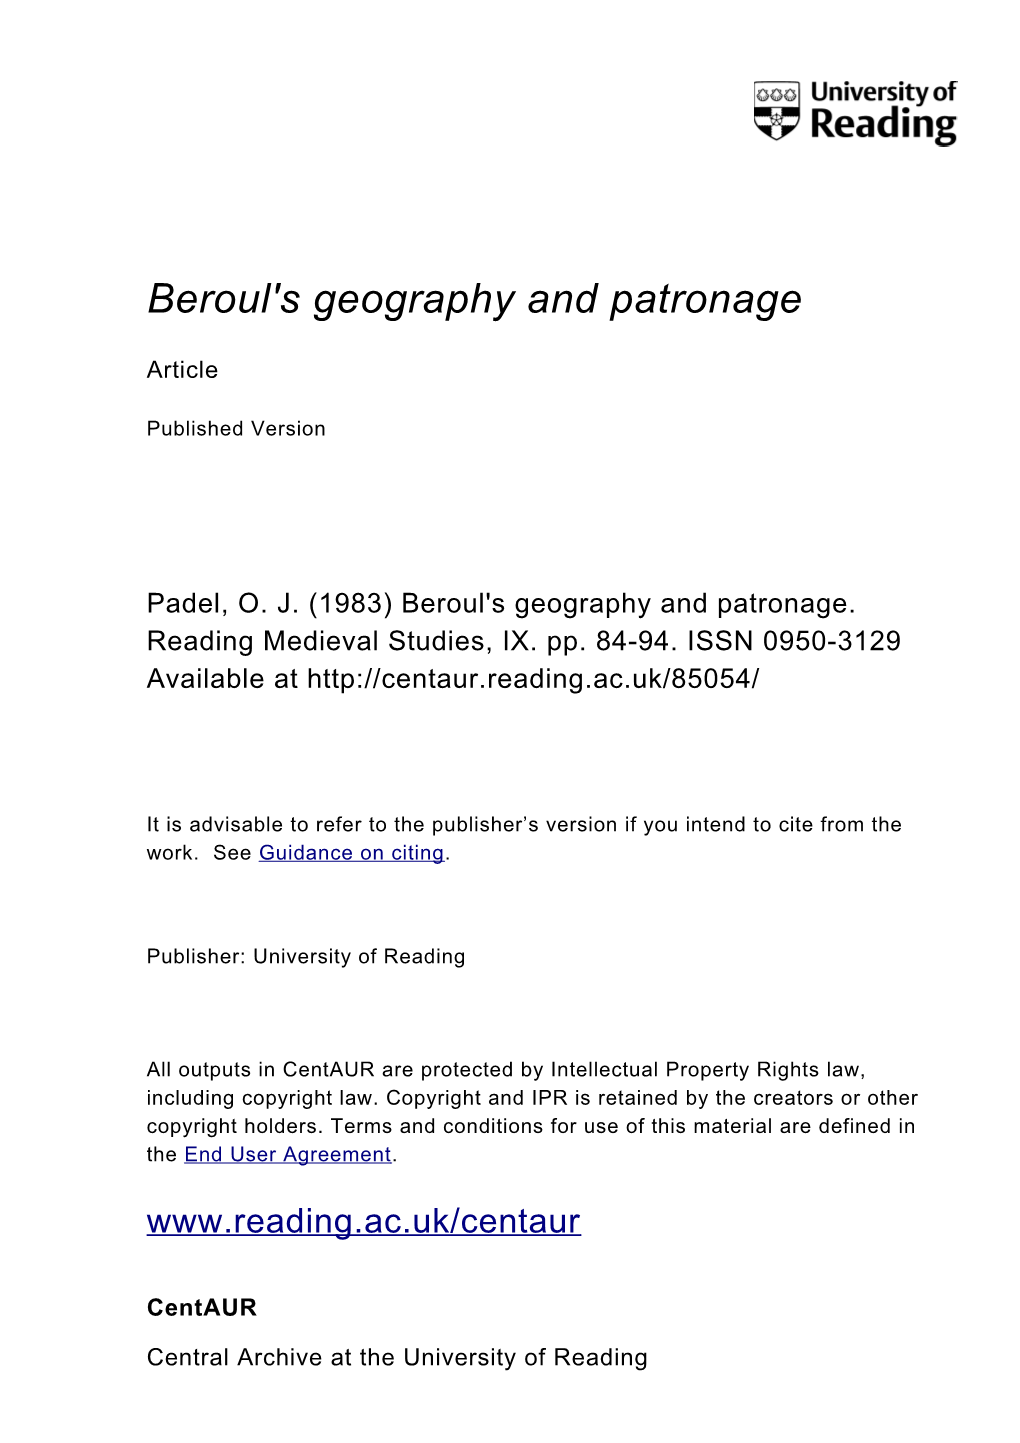 Beroul's Geography and Patronage